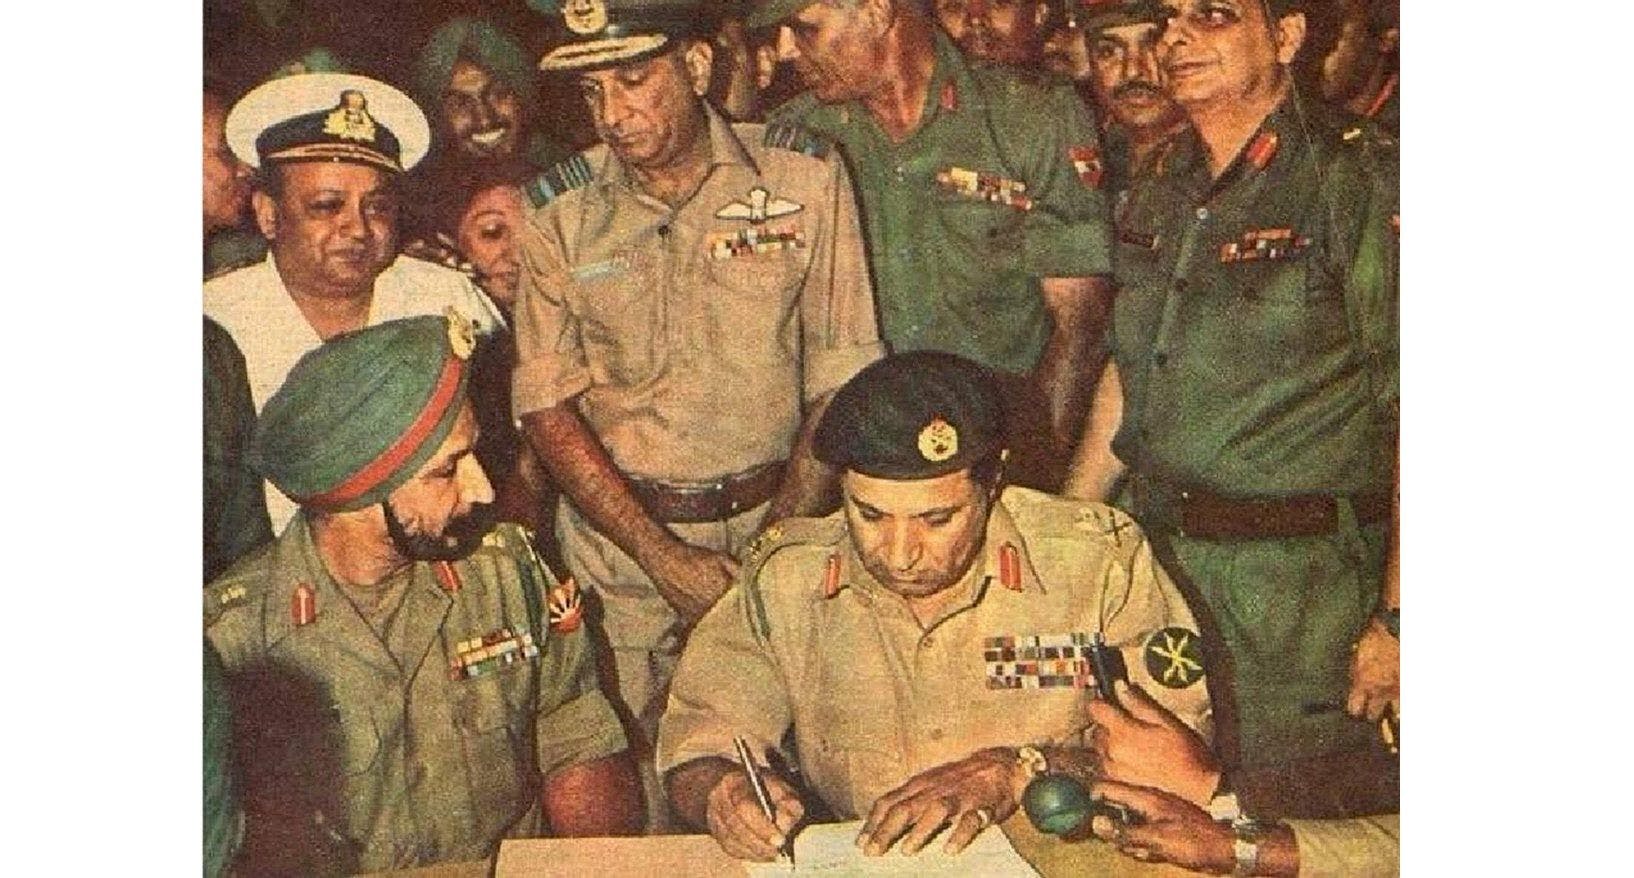 Lt Gen Sagat Singh second from the top right, Lt Gen J S Aurora, GOC-IN-C, Eastern Command and Lt Gen A A K Niazi of Pakistan army signing the surrender documents in Dhaka on Dec 16, 1971. Vice Admiral N Krishnan, Air Marshal H C Dewan. Maj. Gen. J FR Jacob are also seen in the picture.